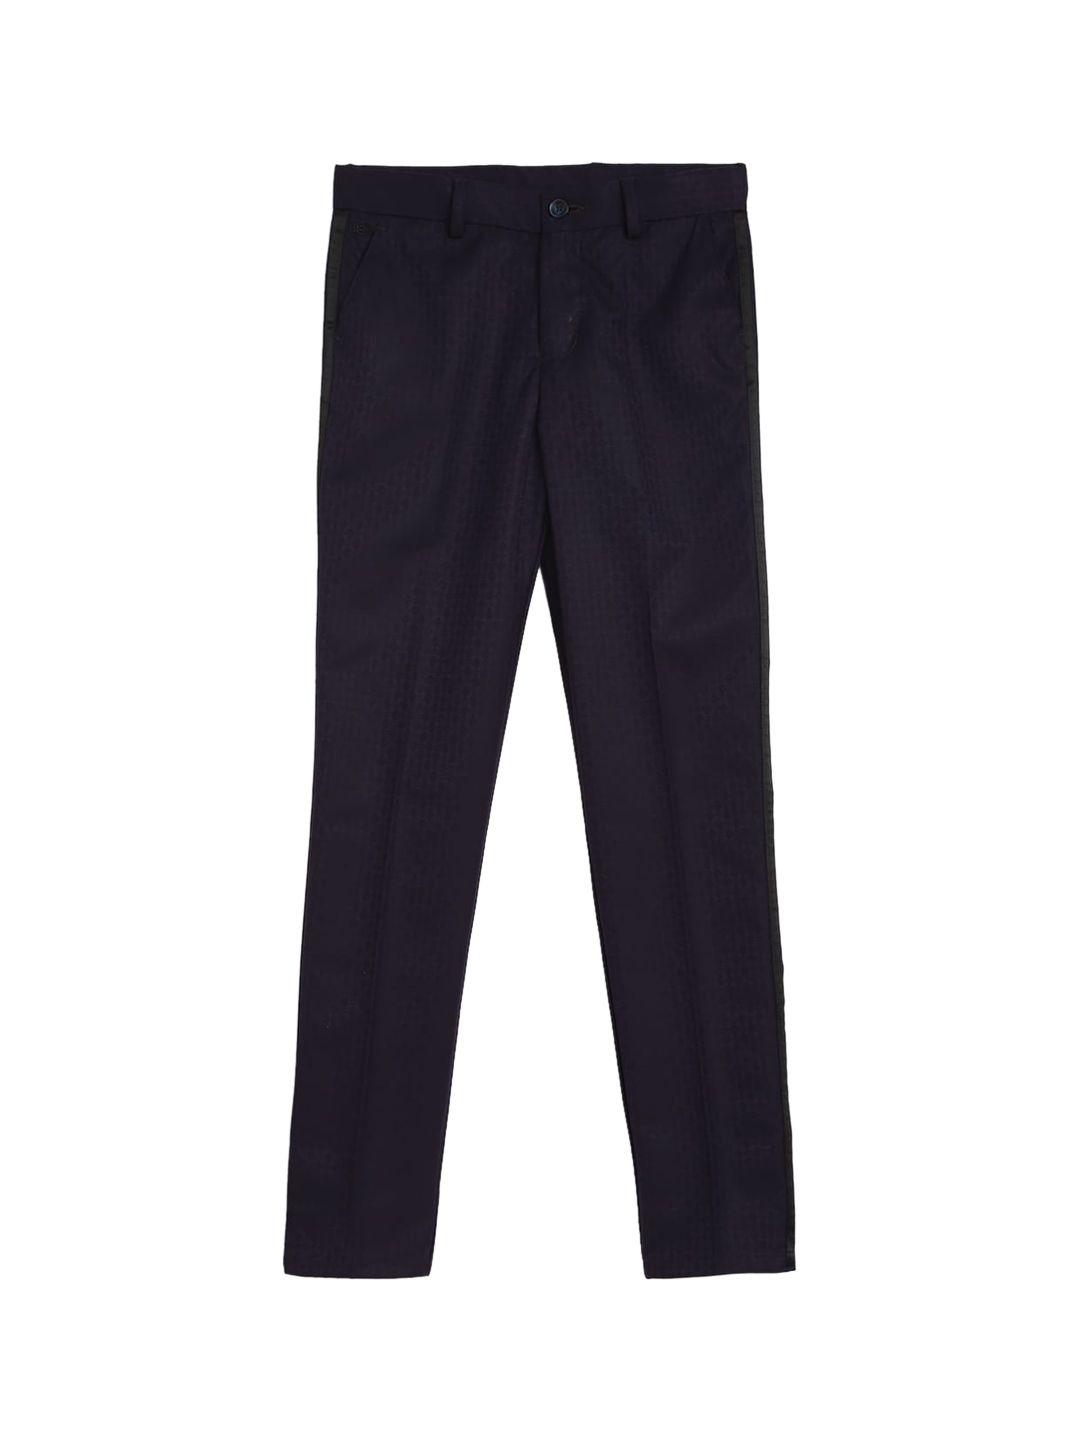 peter england boys regular fit mid-rise formal trousers